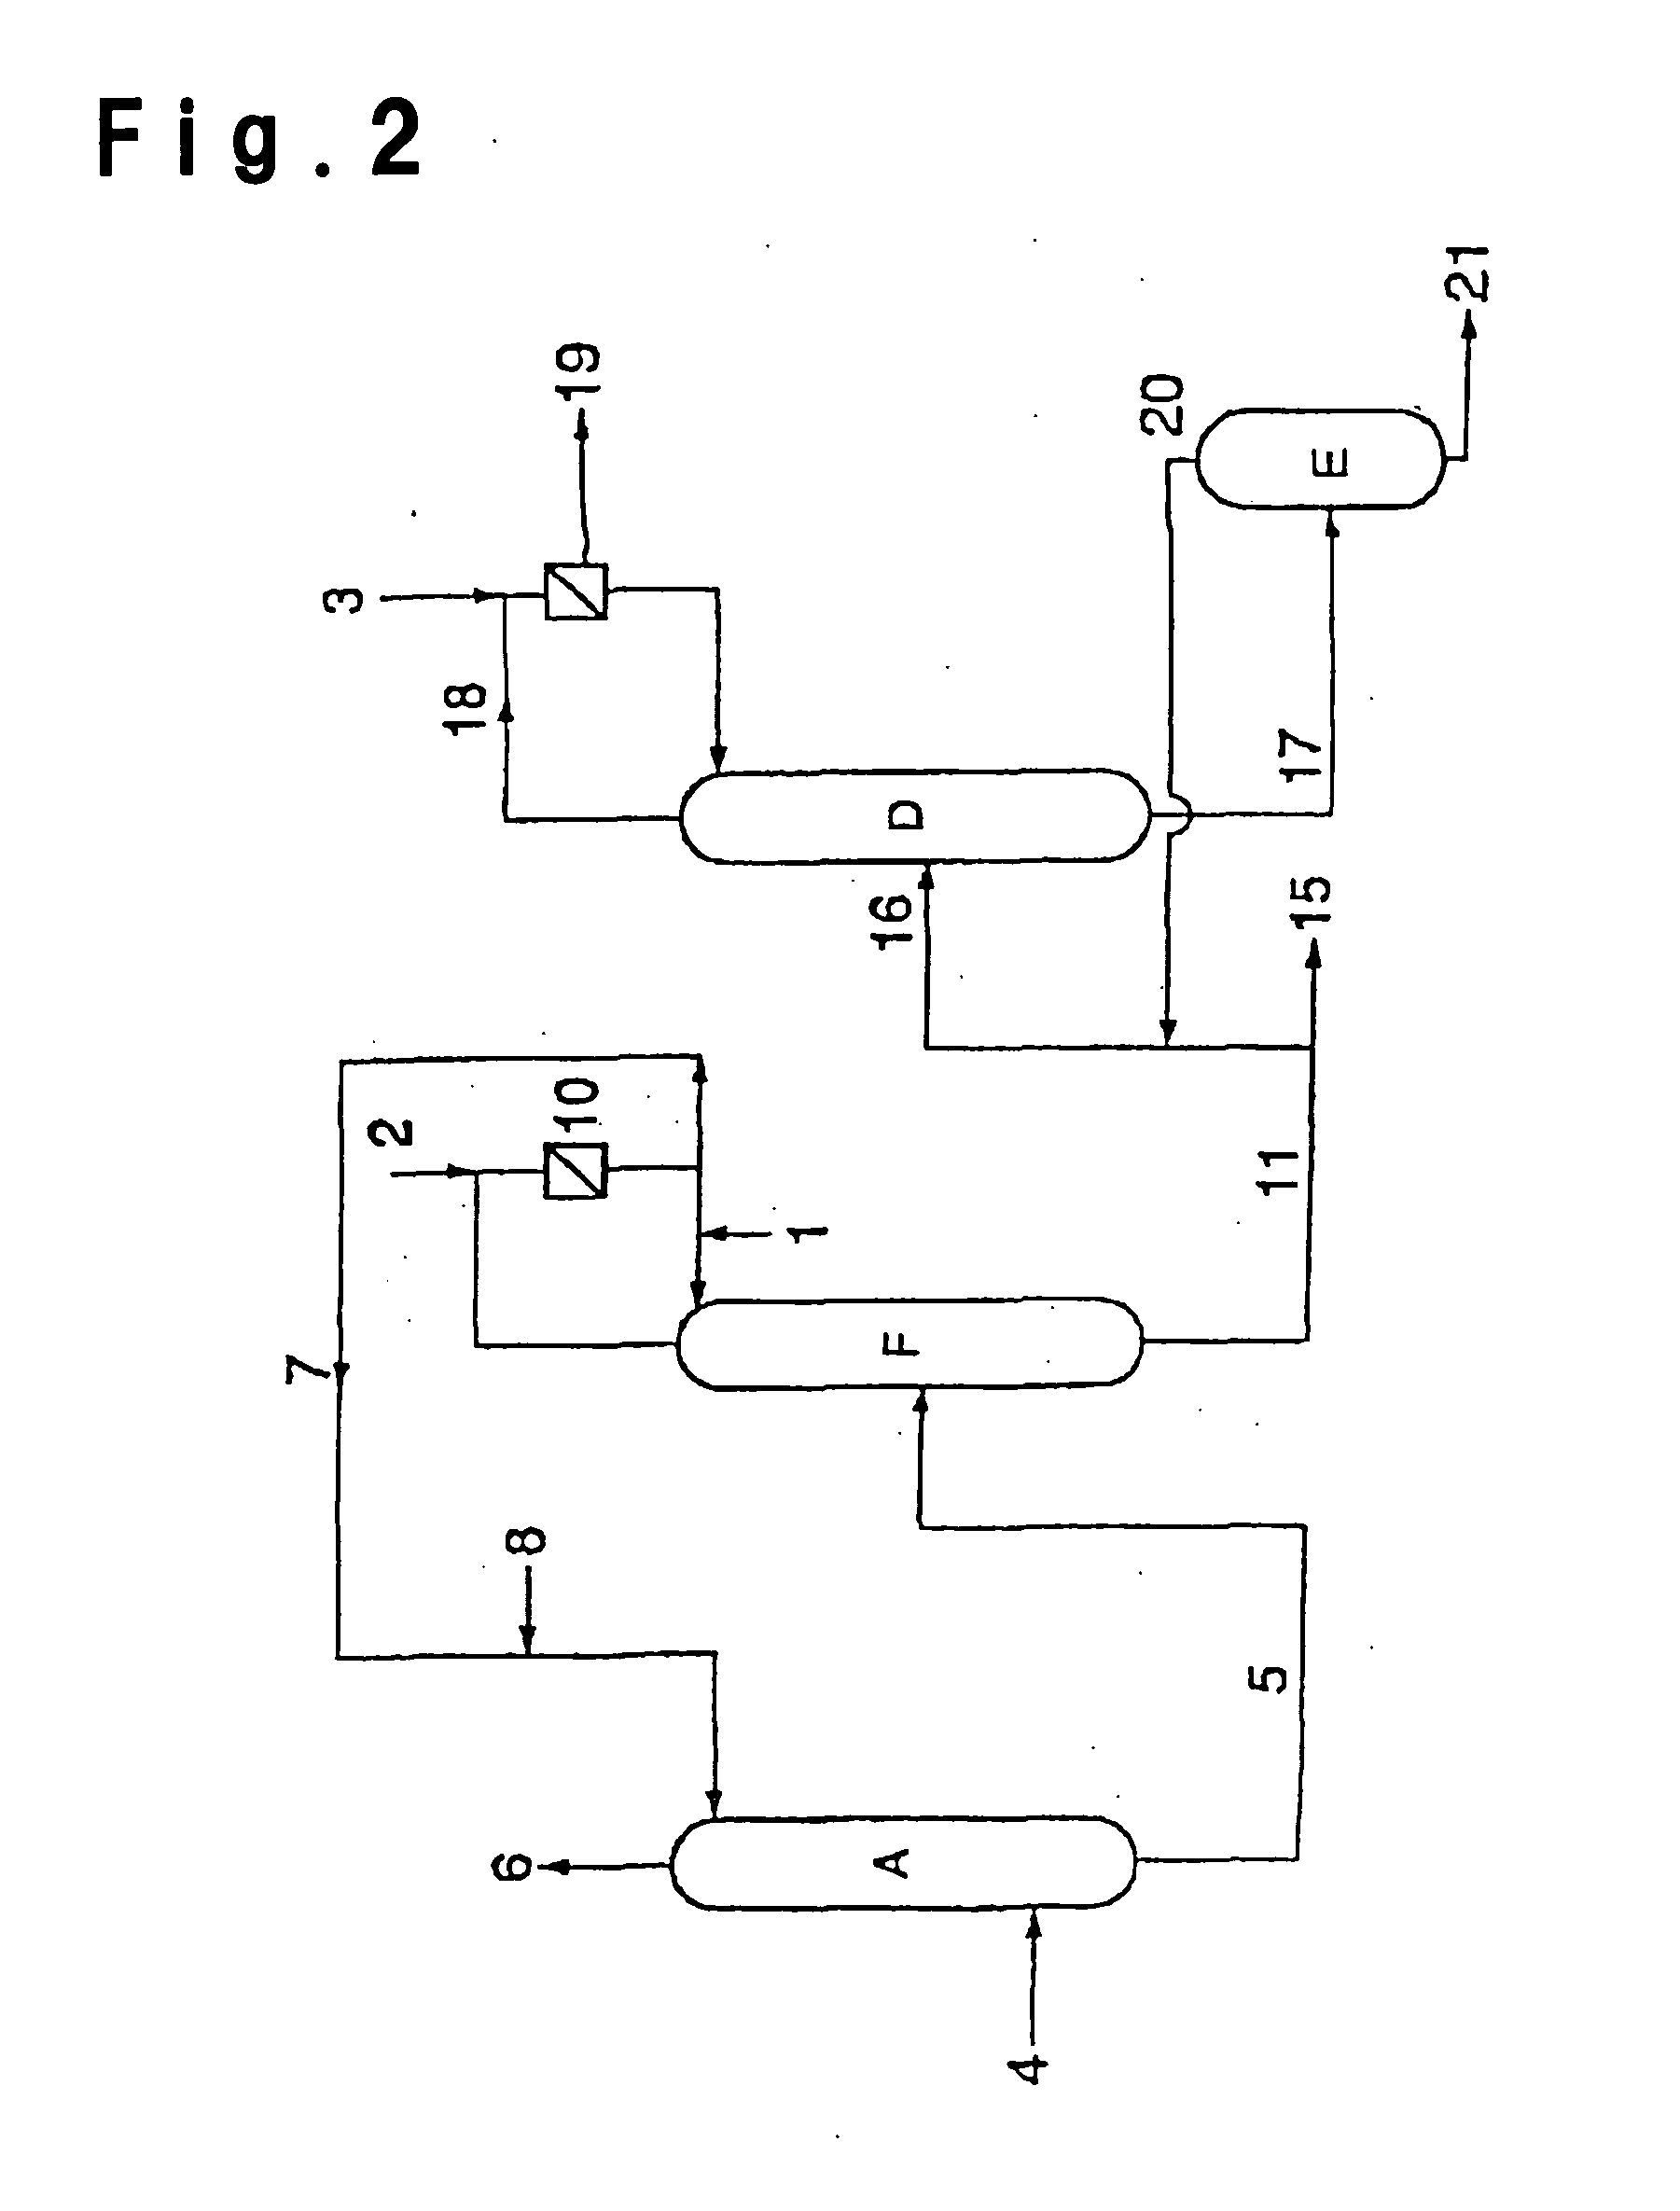 Process for producing (meth)acrylic acid compound